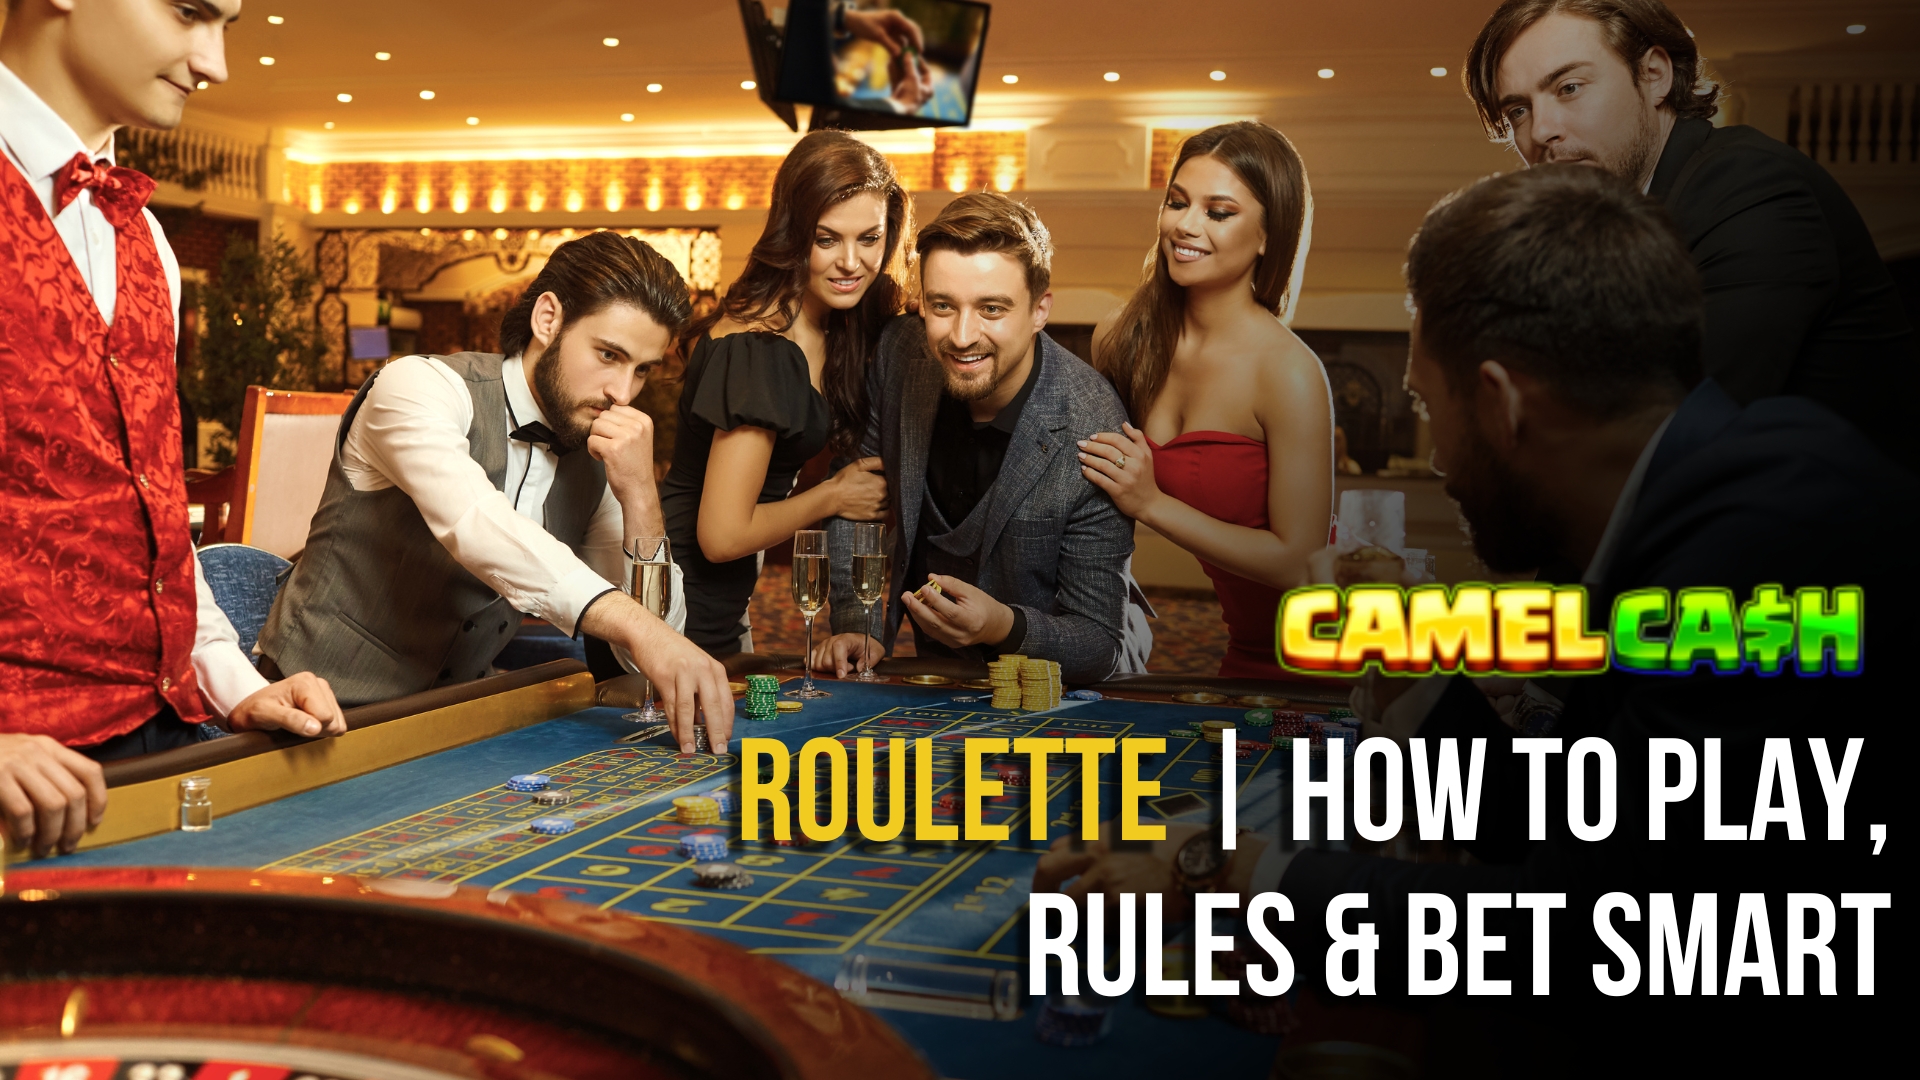 Roulette, How to play